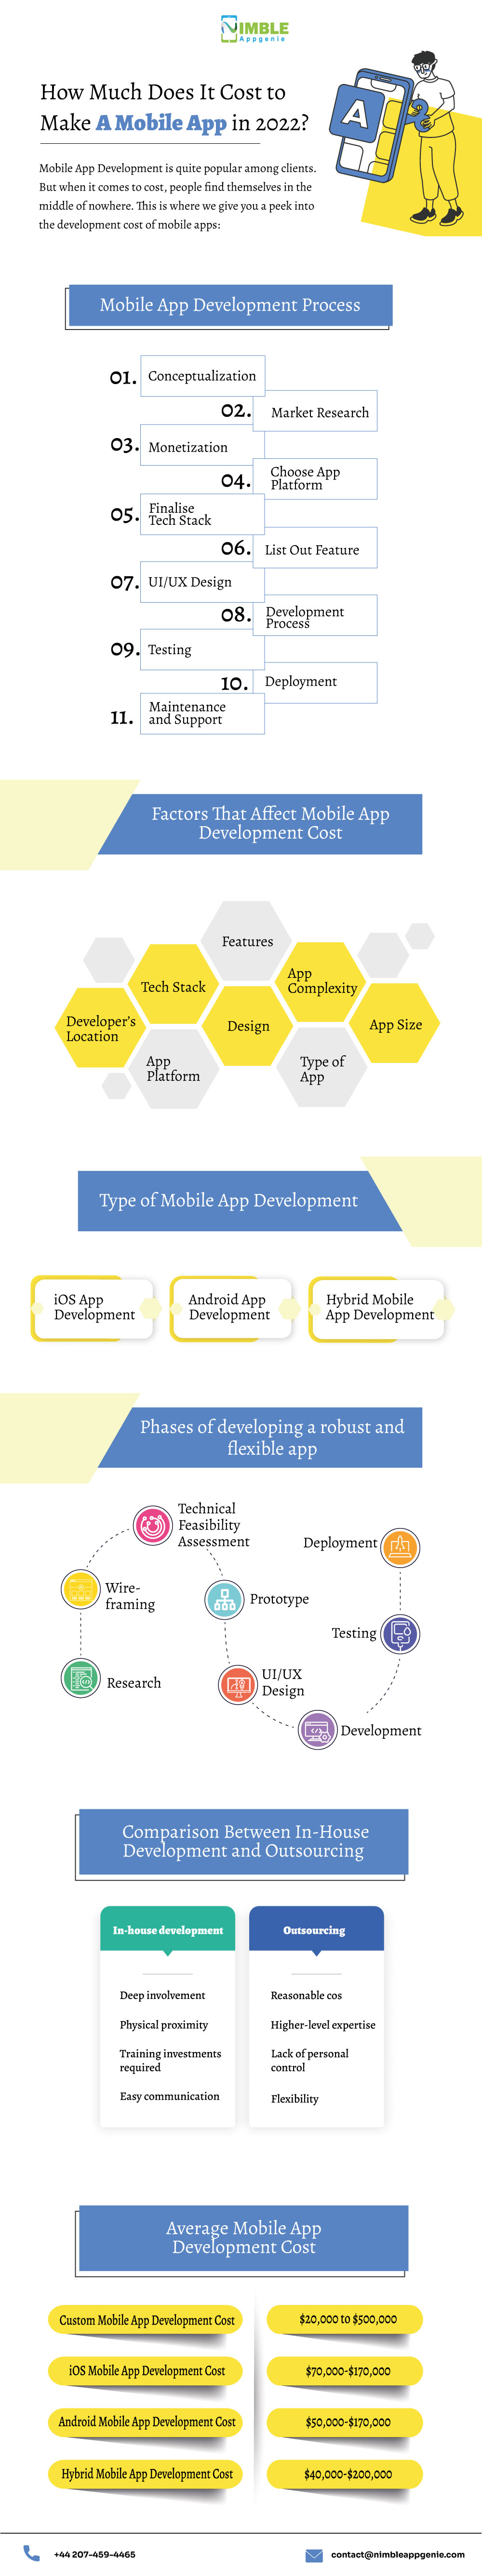 How-Much-Does-It-Cost-To-Make-A-Mobile-App-infographics